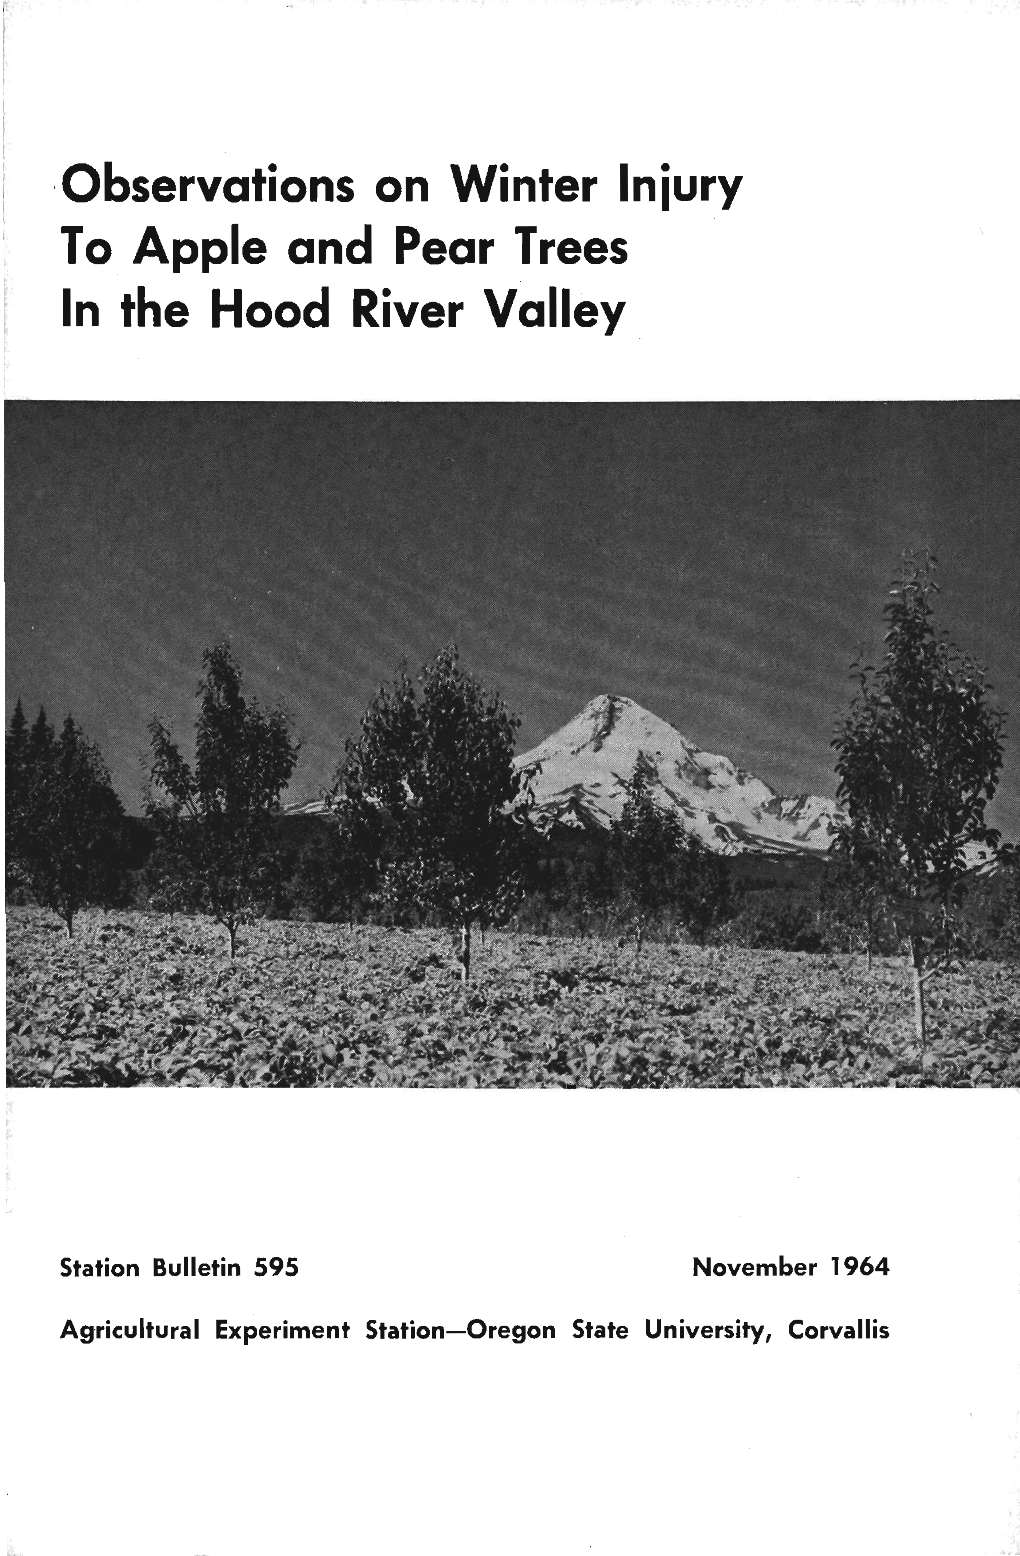 Observations on Winter Injury in the Hood River Valley